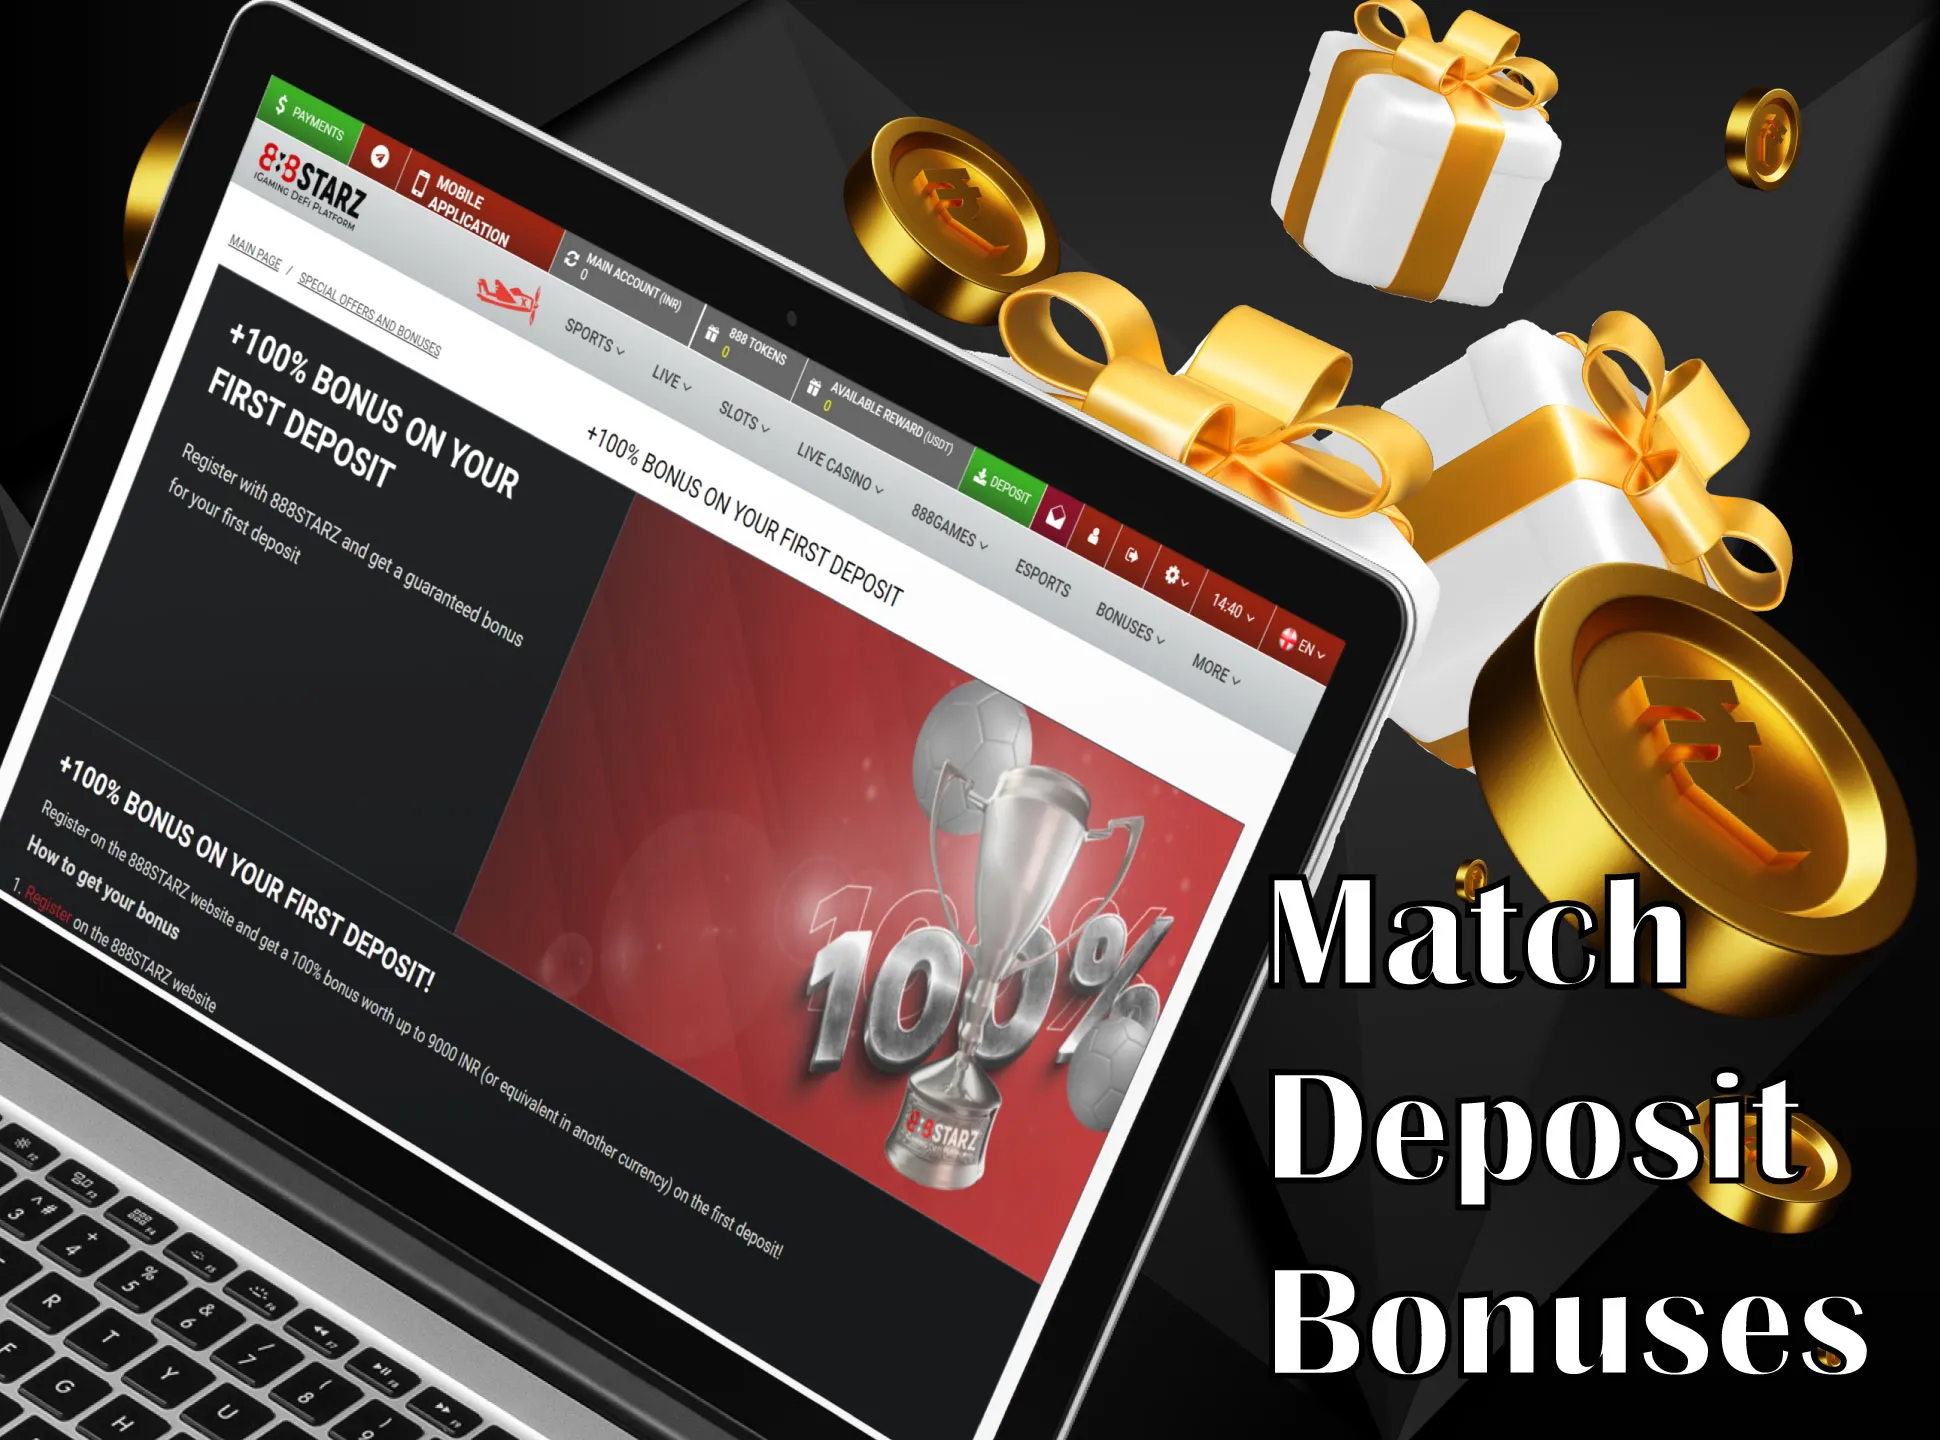 Match bonuses give you some percents on you deposit.